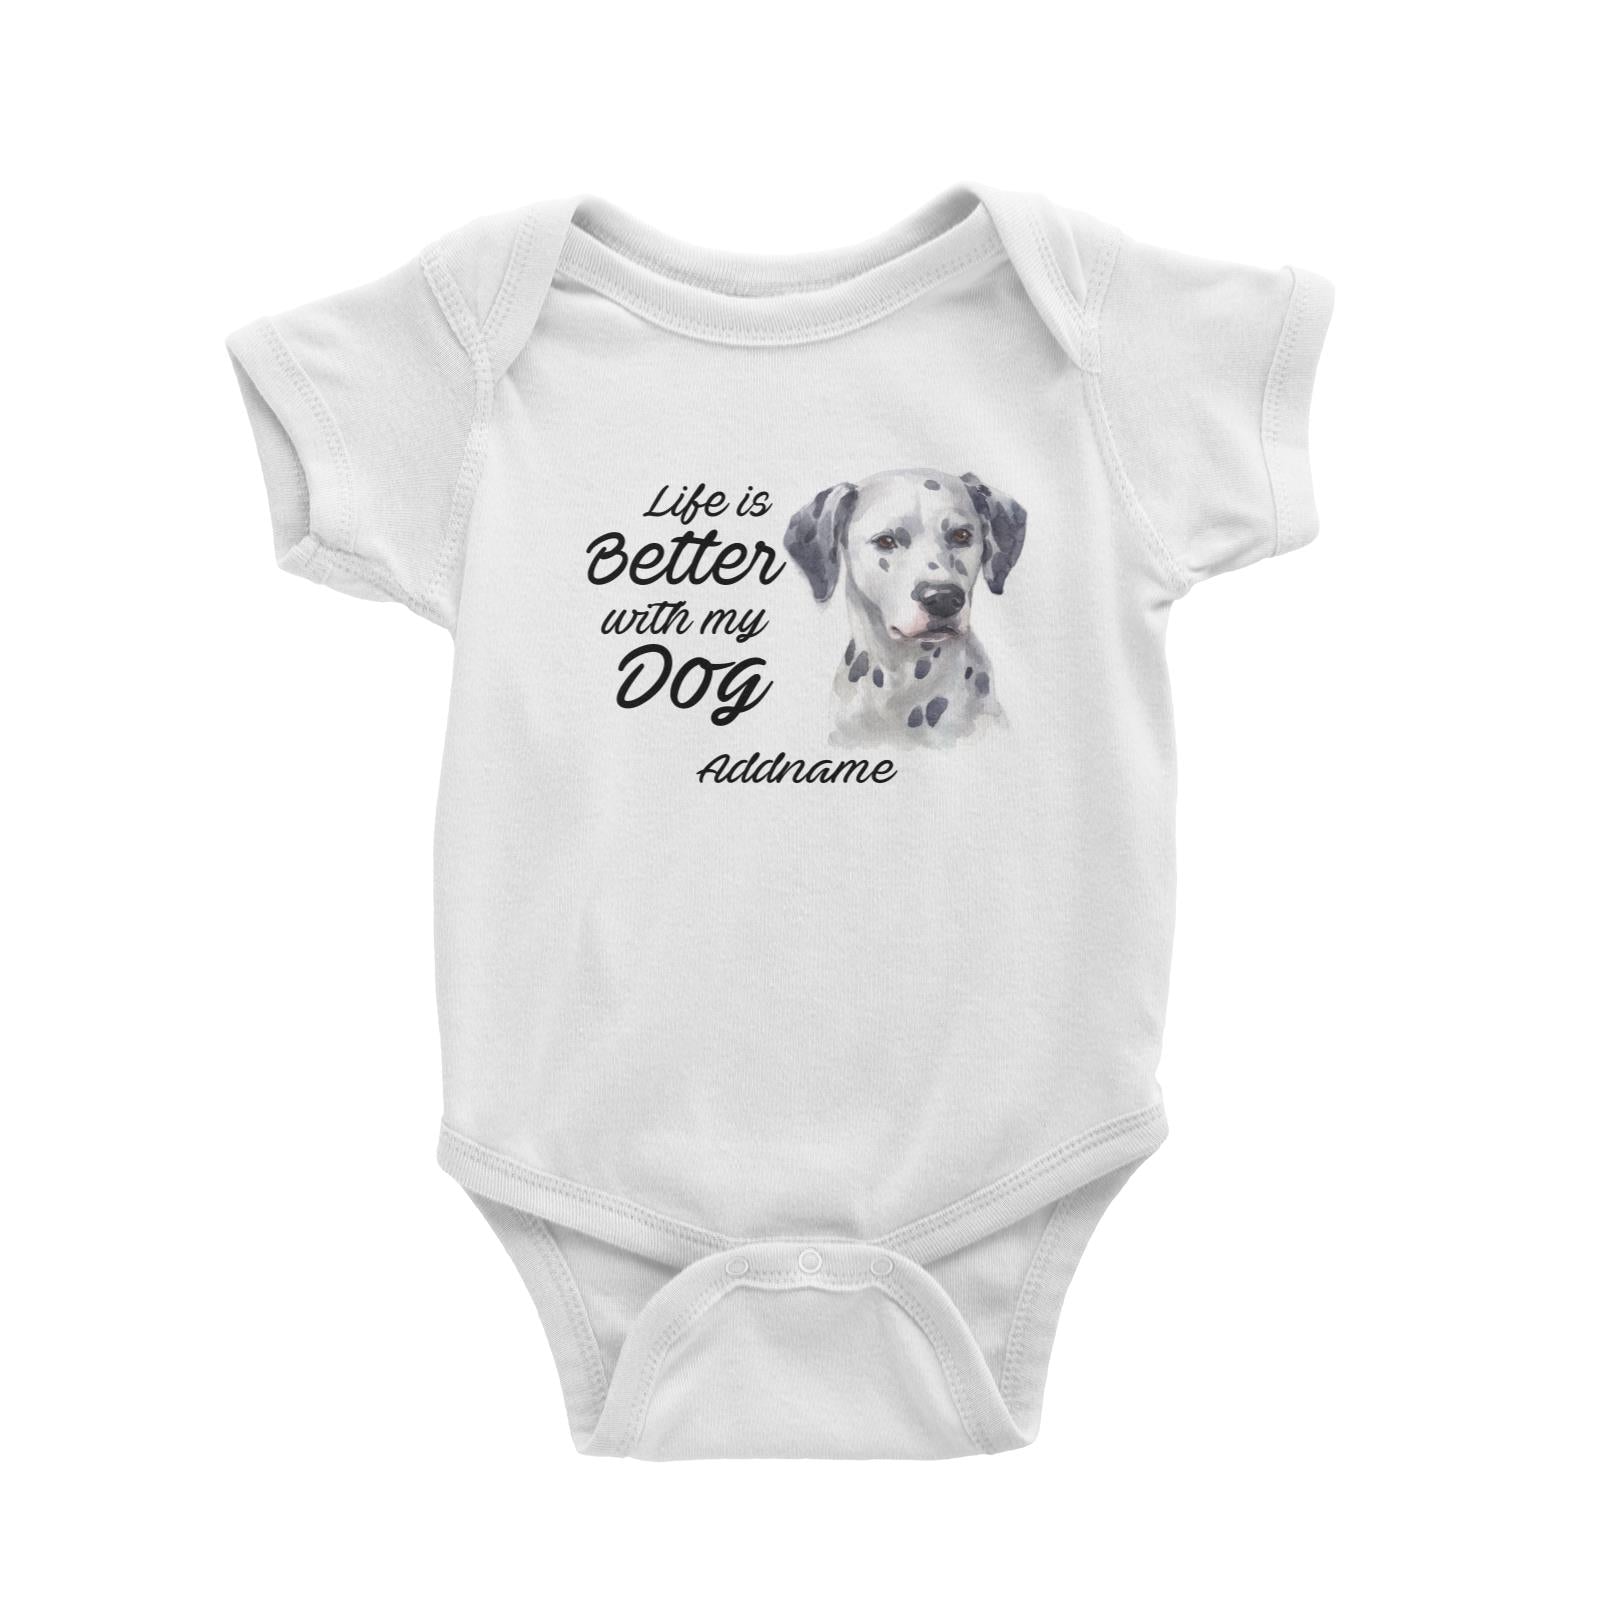 Watercolor Life is Better With My Dog Dalmatian Addname Baby Romper